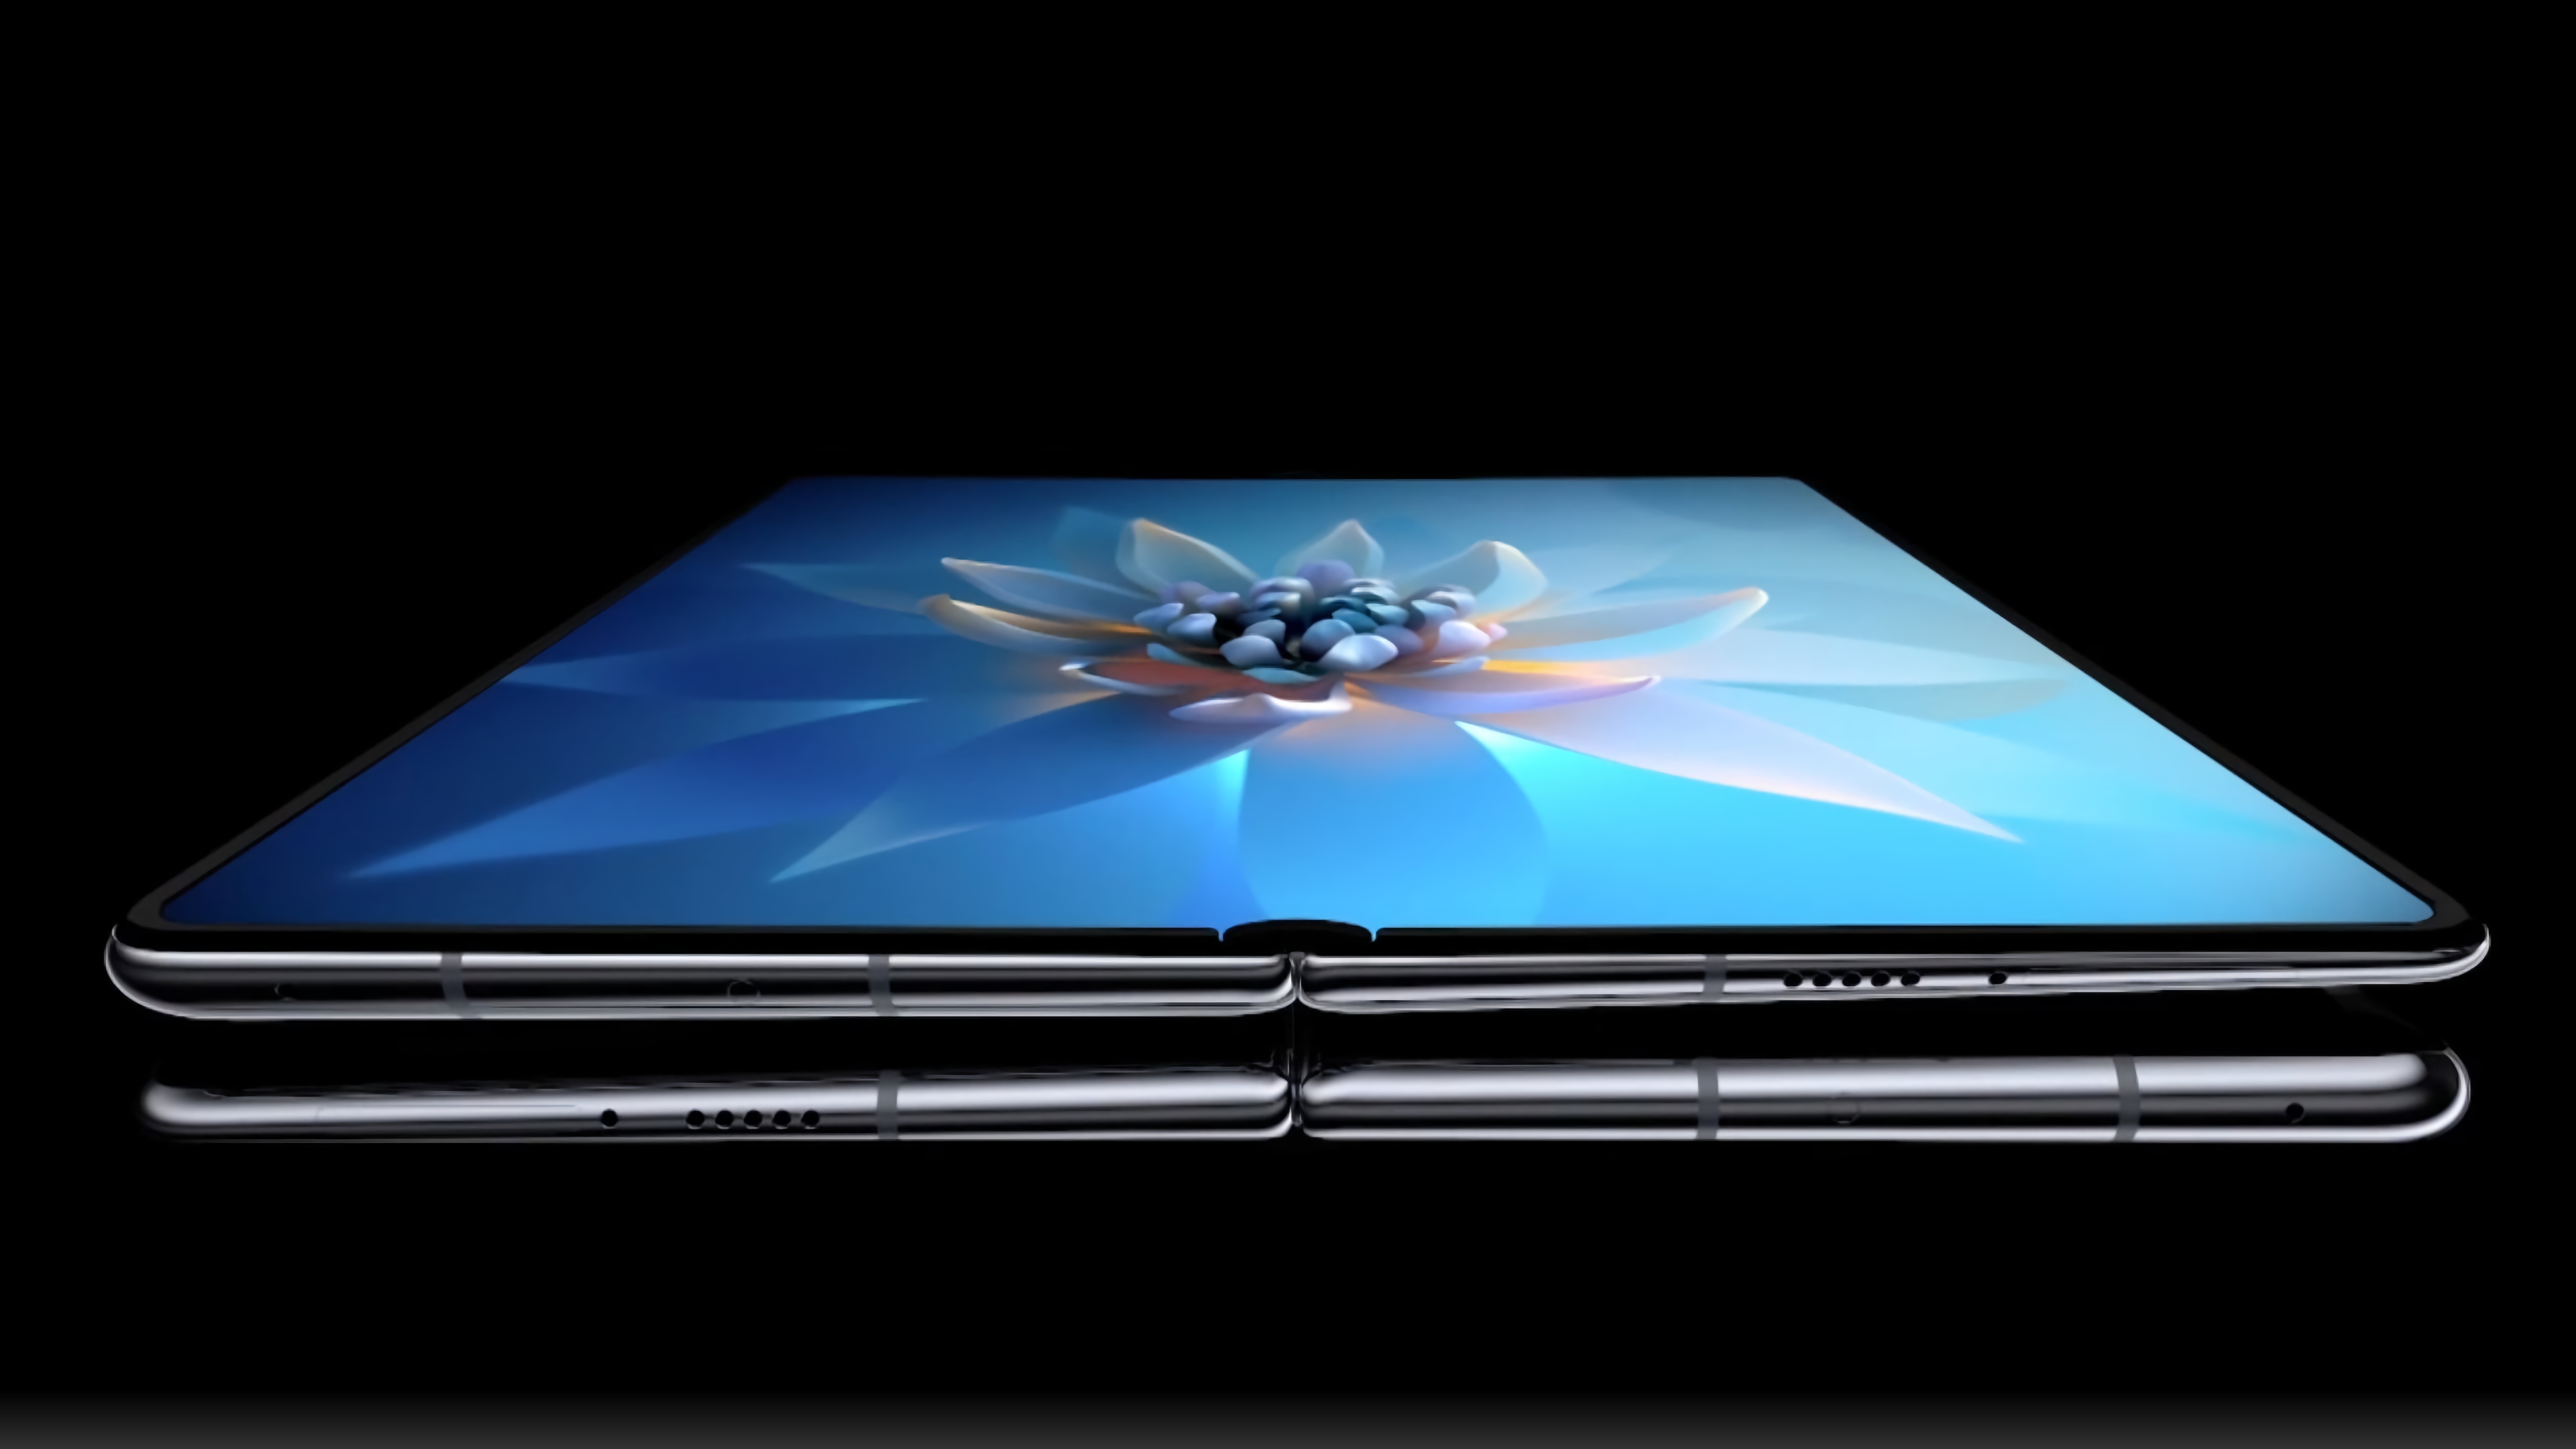 Honor plans to launch Magic Fold and Magic Wing smartphones in Europe